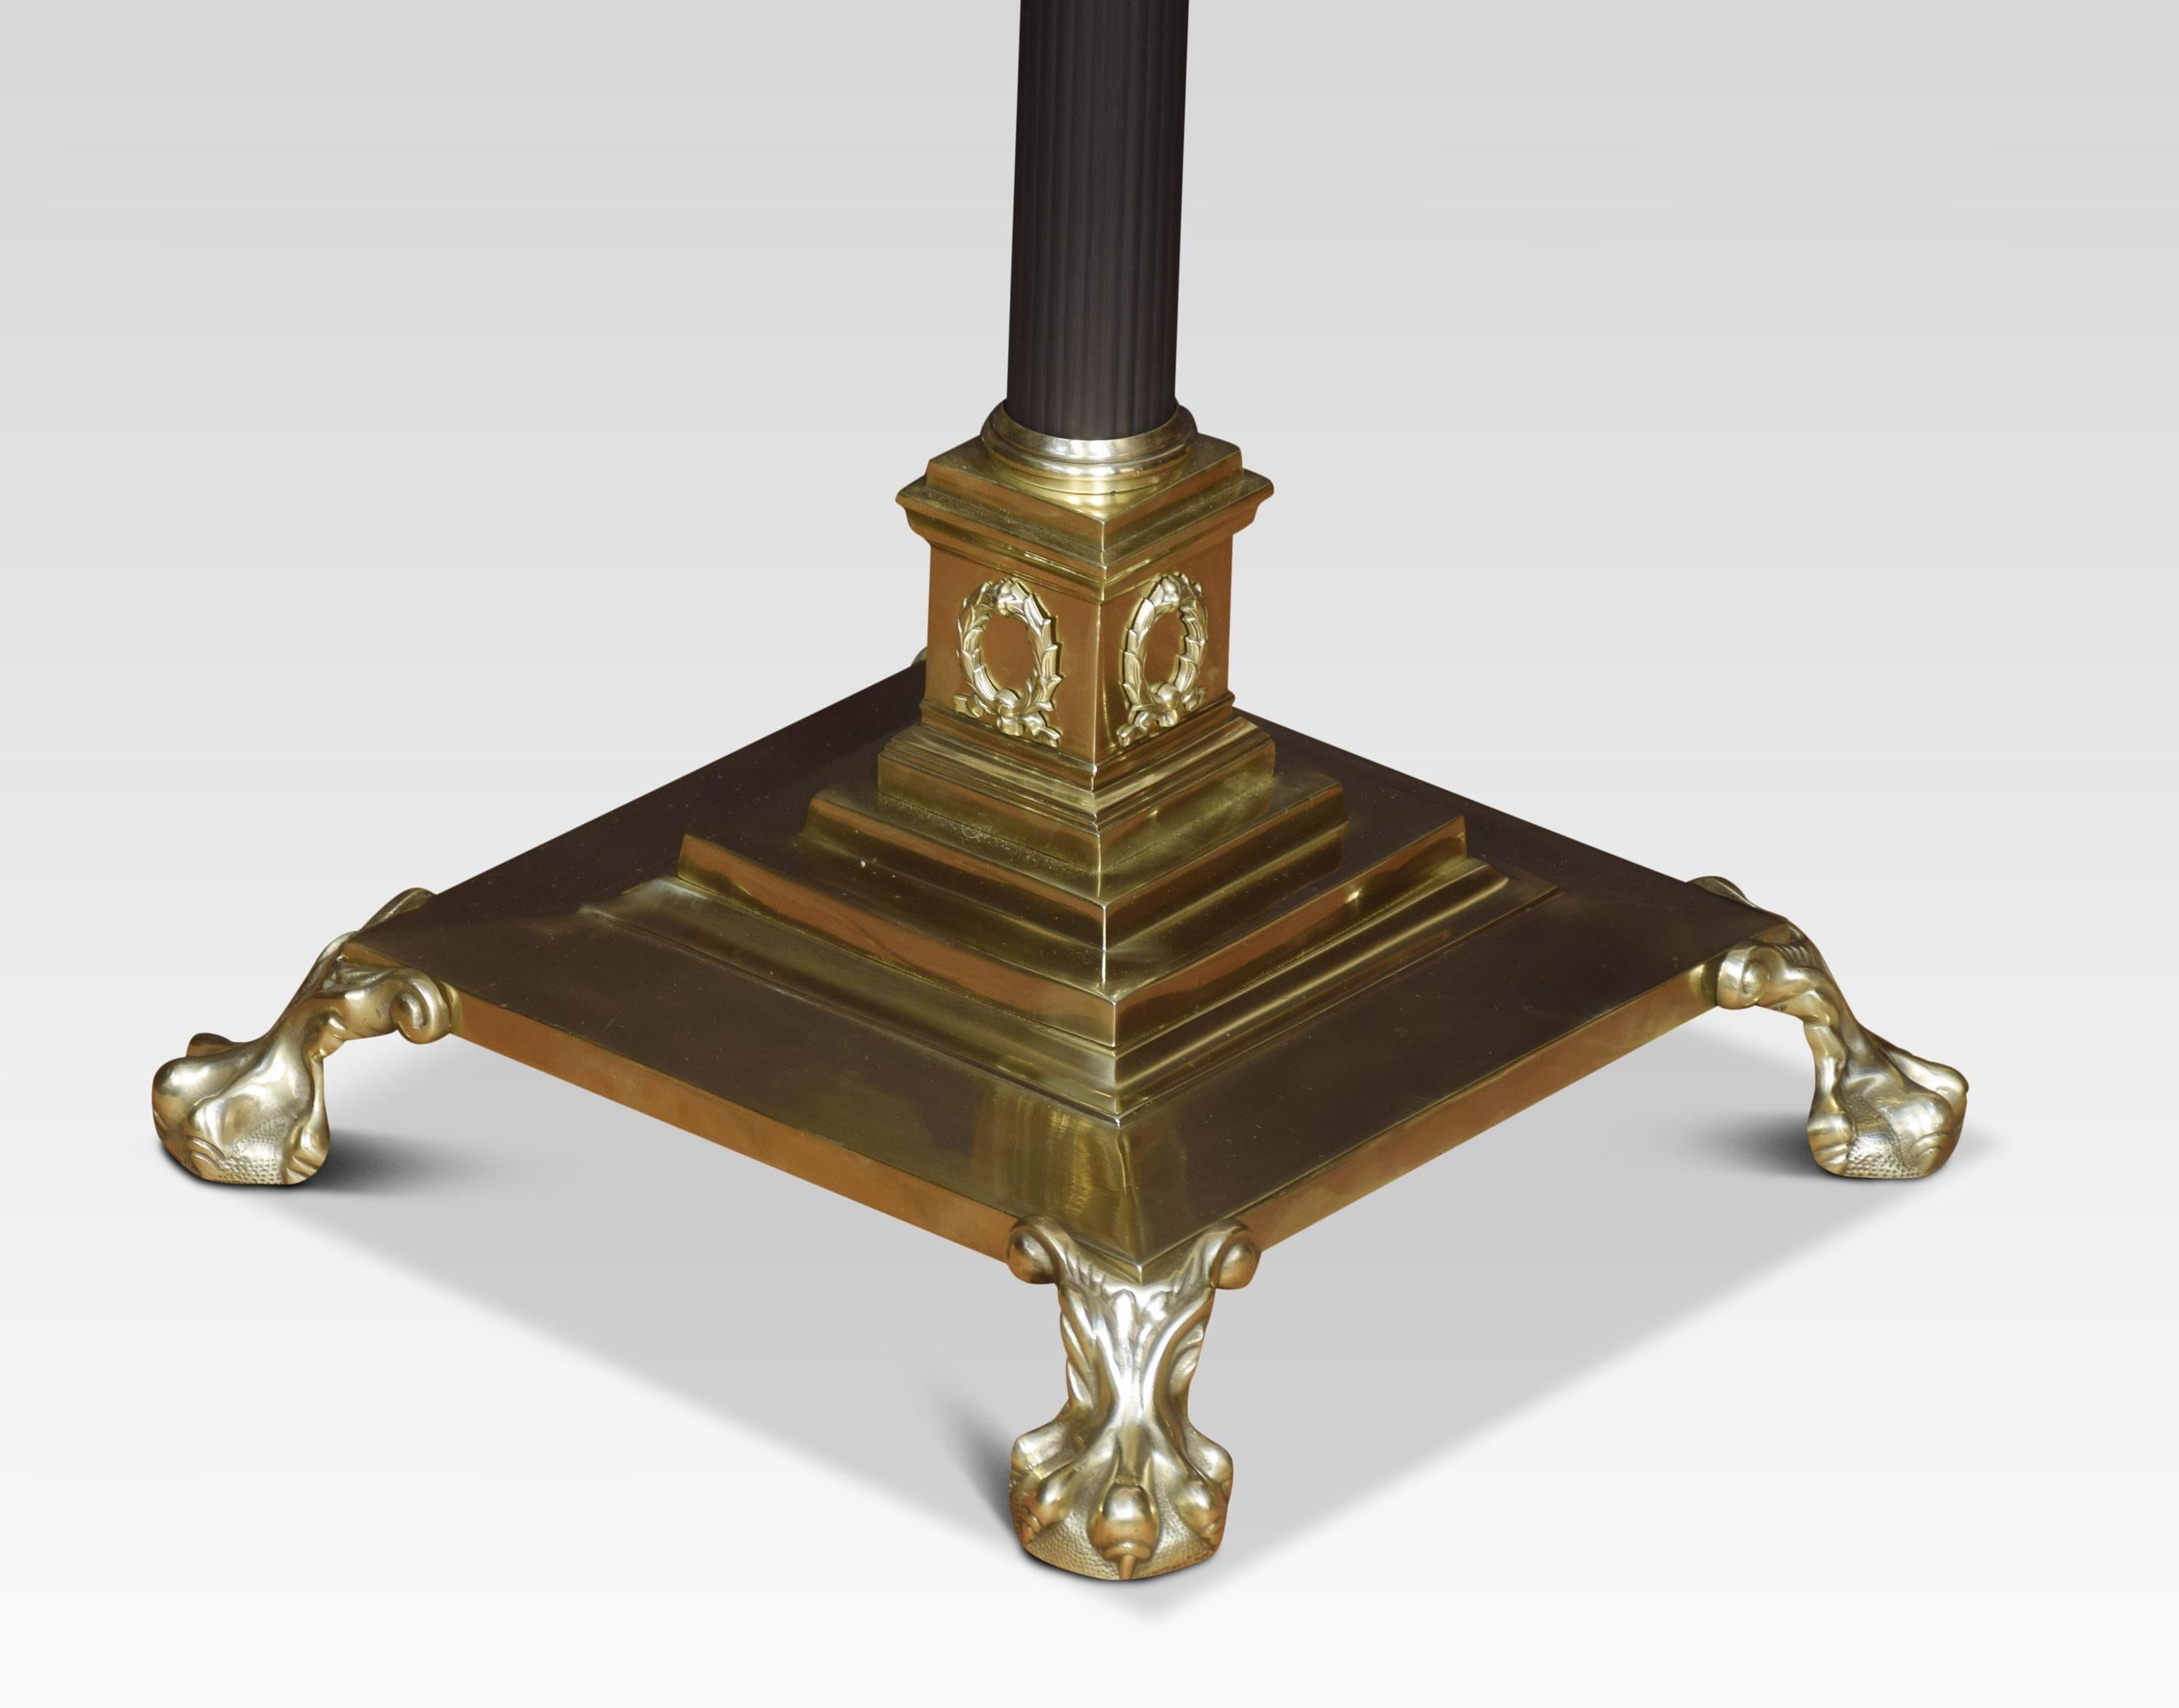 19th century brass standard lamp. Having ebonized Corinthian column and adjustable stem, on a stepped square base with paw feet. Dimensions
Height 53.5 inches adjustable 73.5 inches
Width 14.5 inches
Depth 14.5 inches.